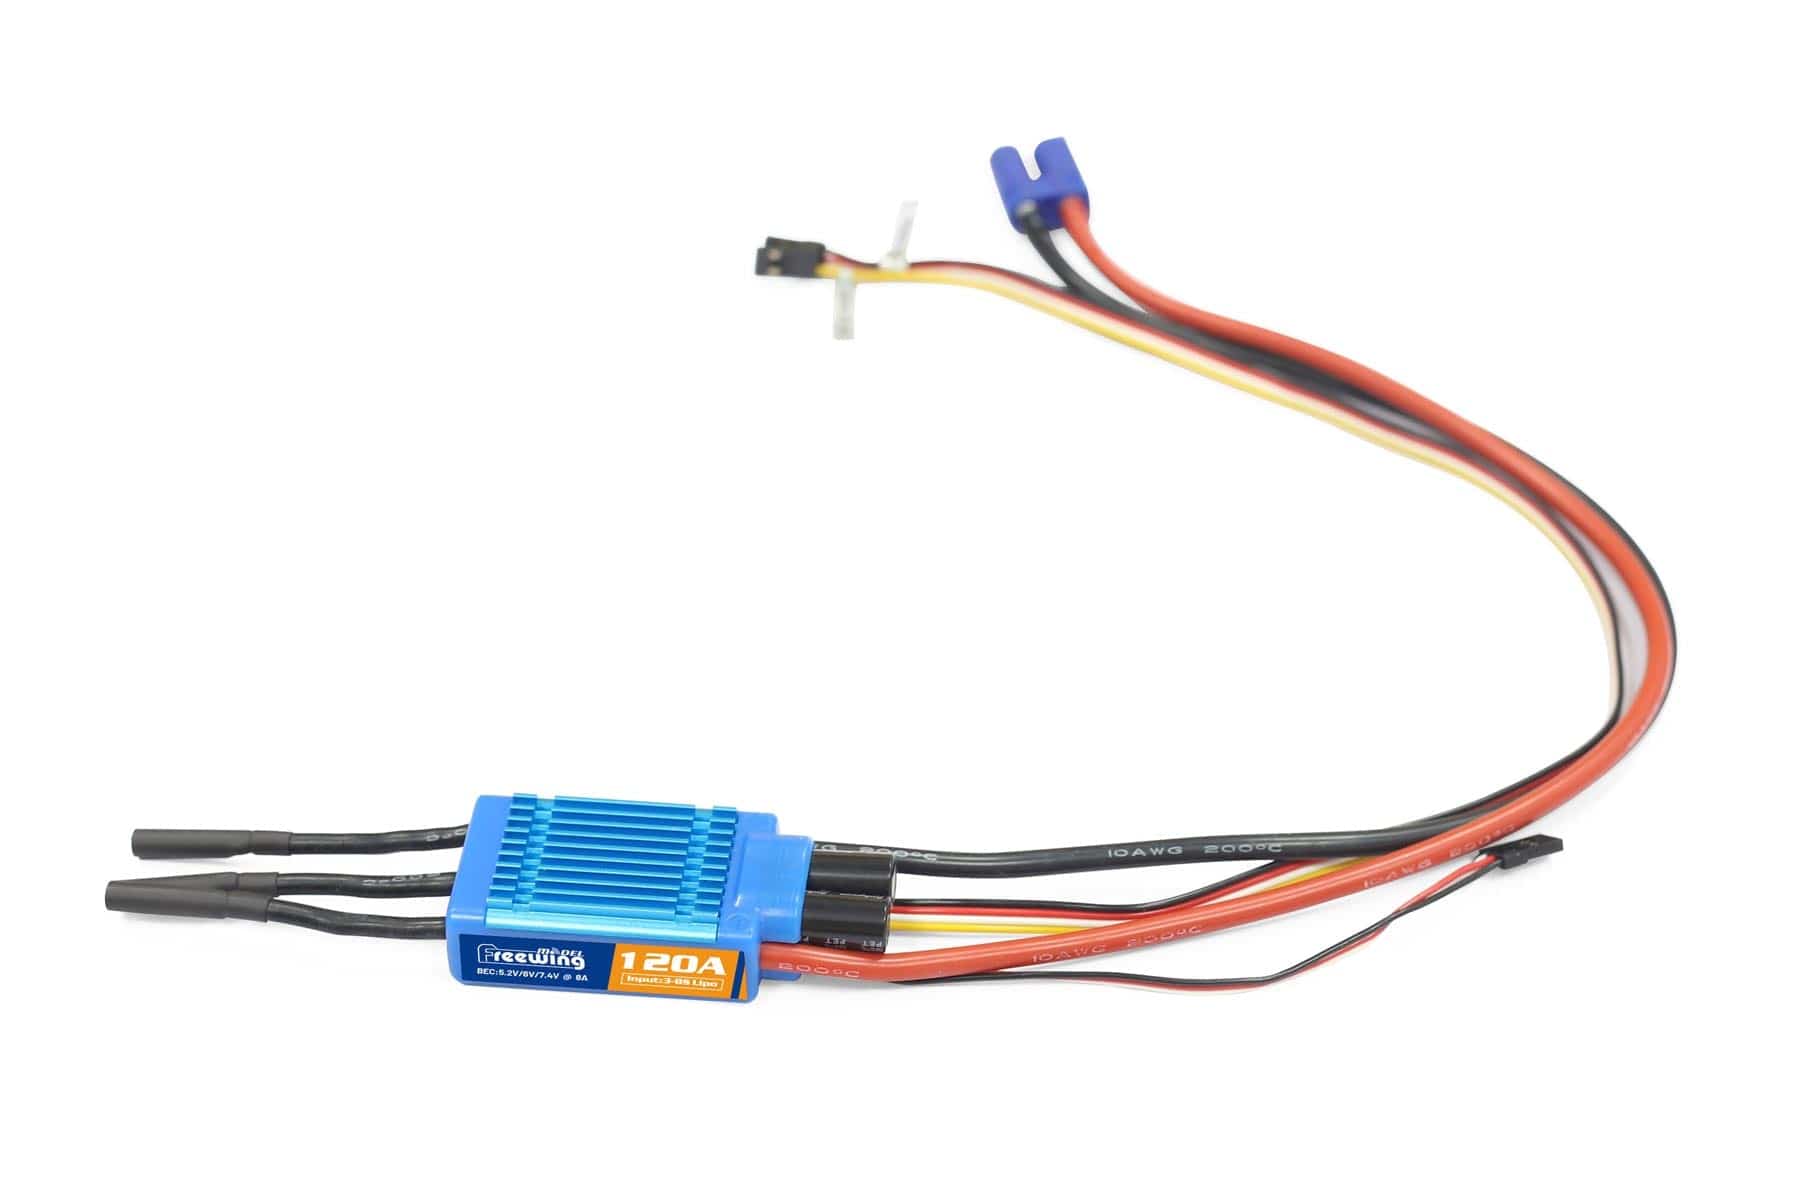 Freewing 120A ESC with 8A BEC and Reverse Thrust Function 092D002001